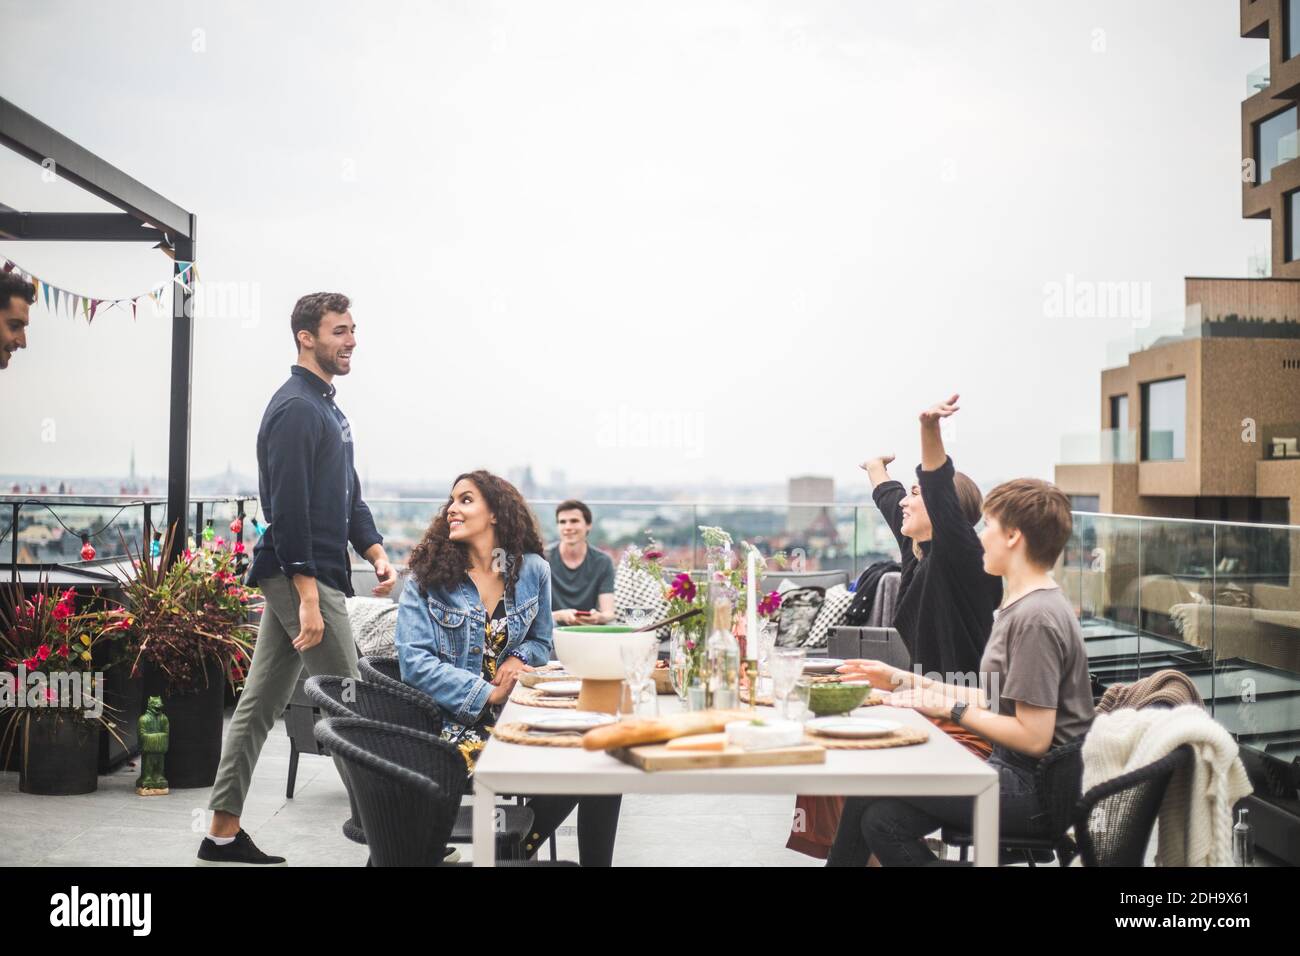 Young female with arms raised greeting friends while sitting by table on terrace Stock Photo